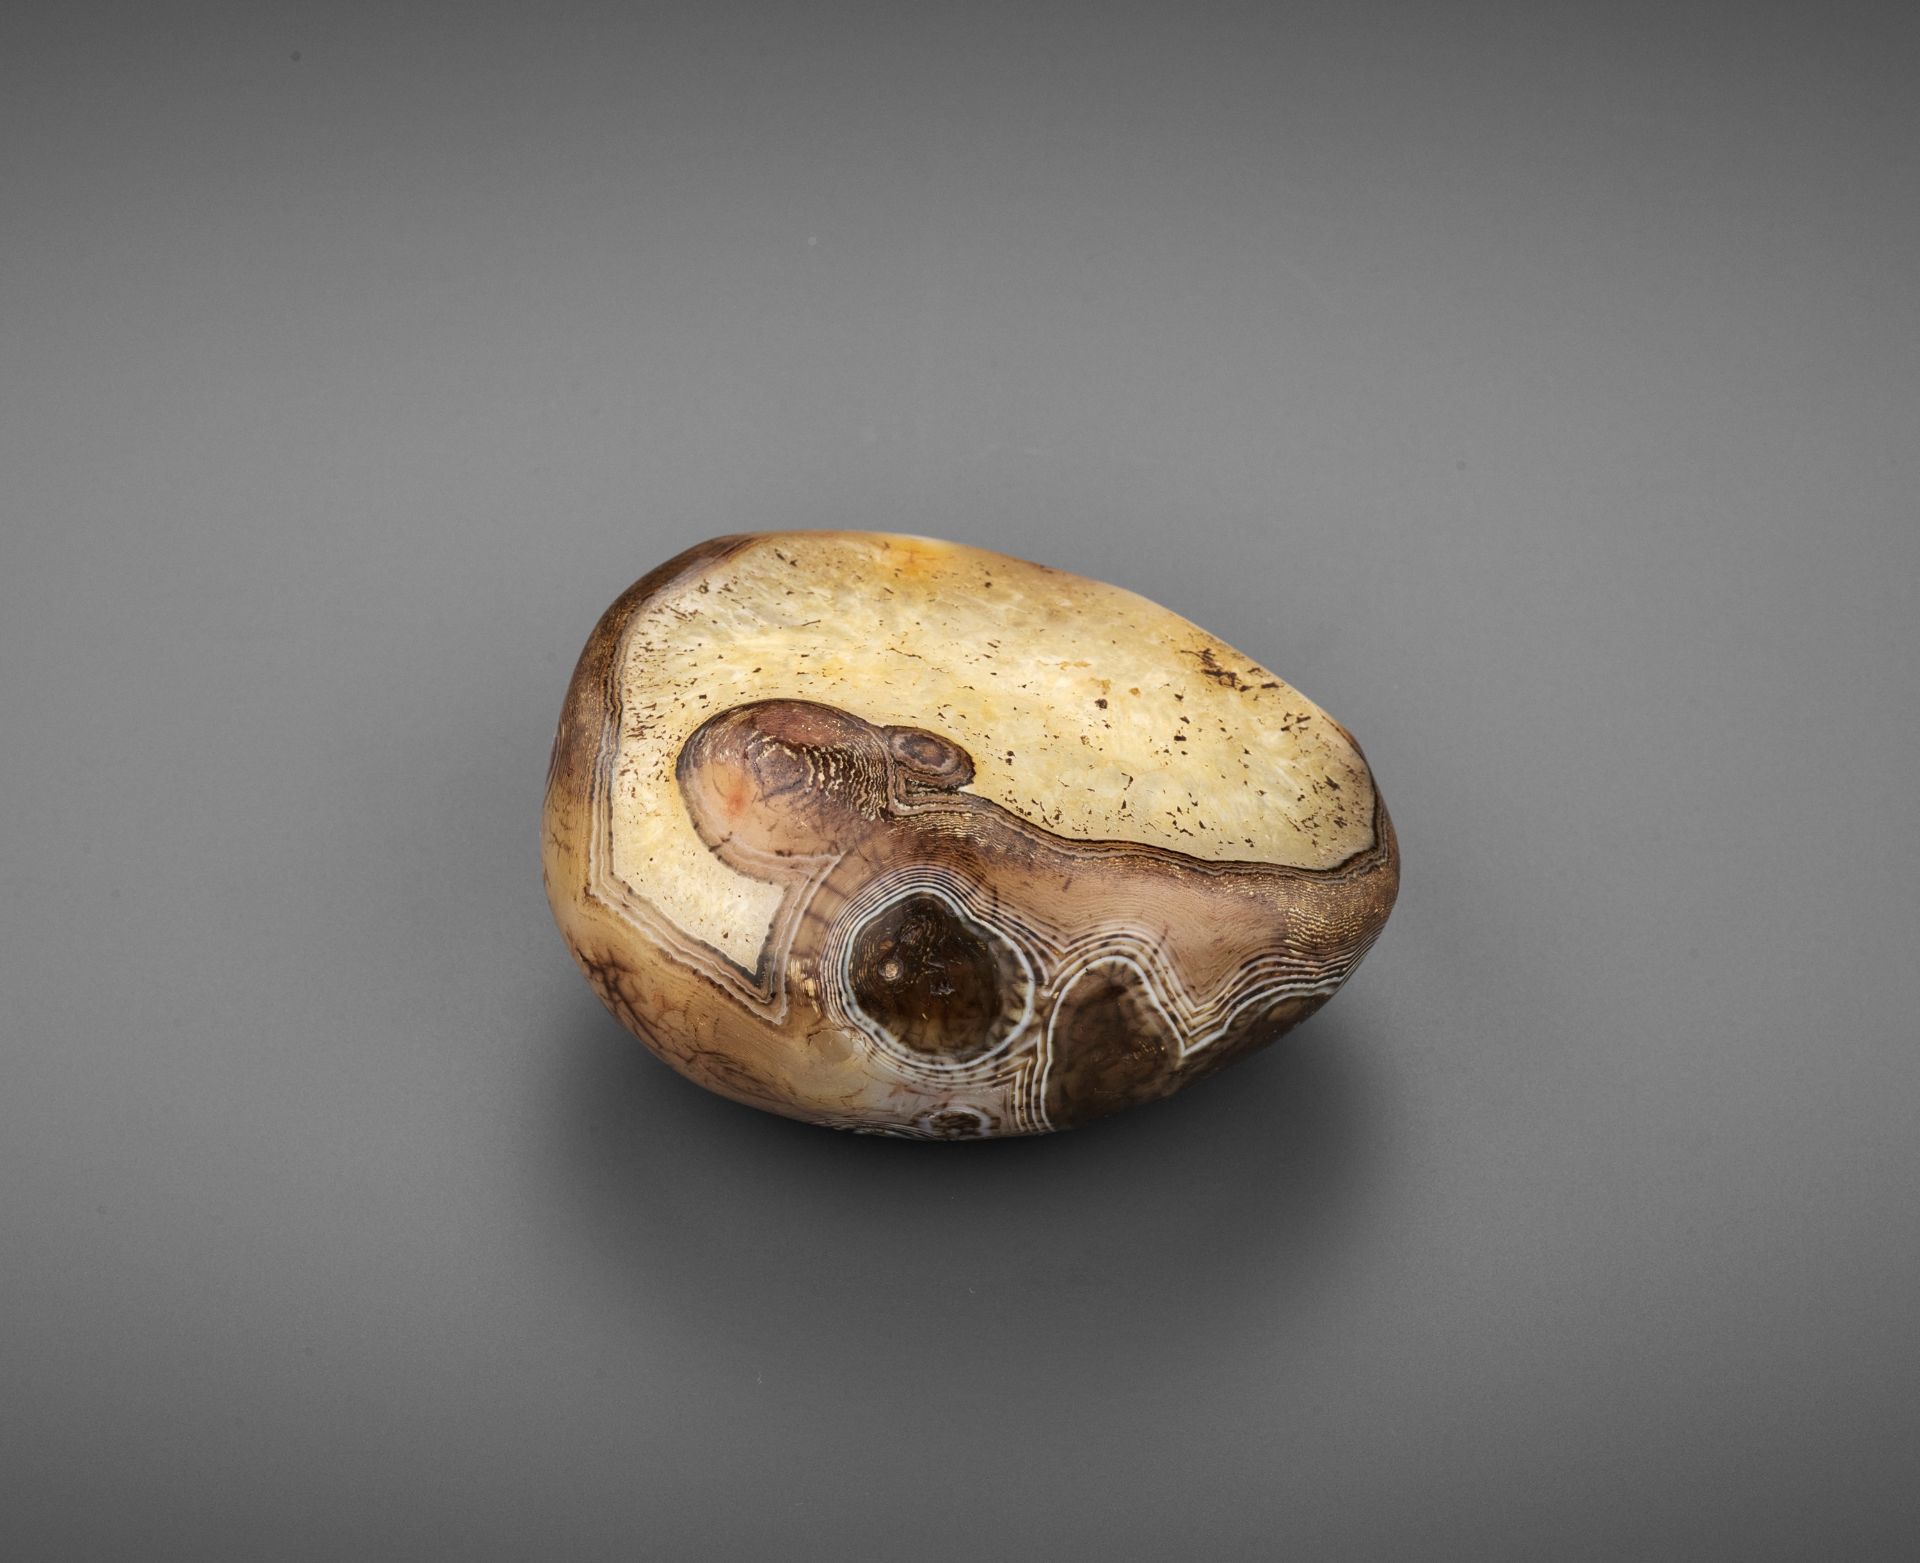 A RARE AGATE 'RECUMBENT HARE' PEBBLE, SONG TO EARLY MING DYNASTY